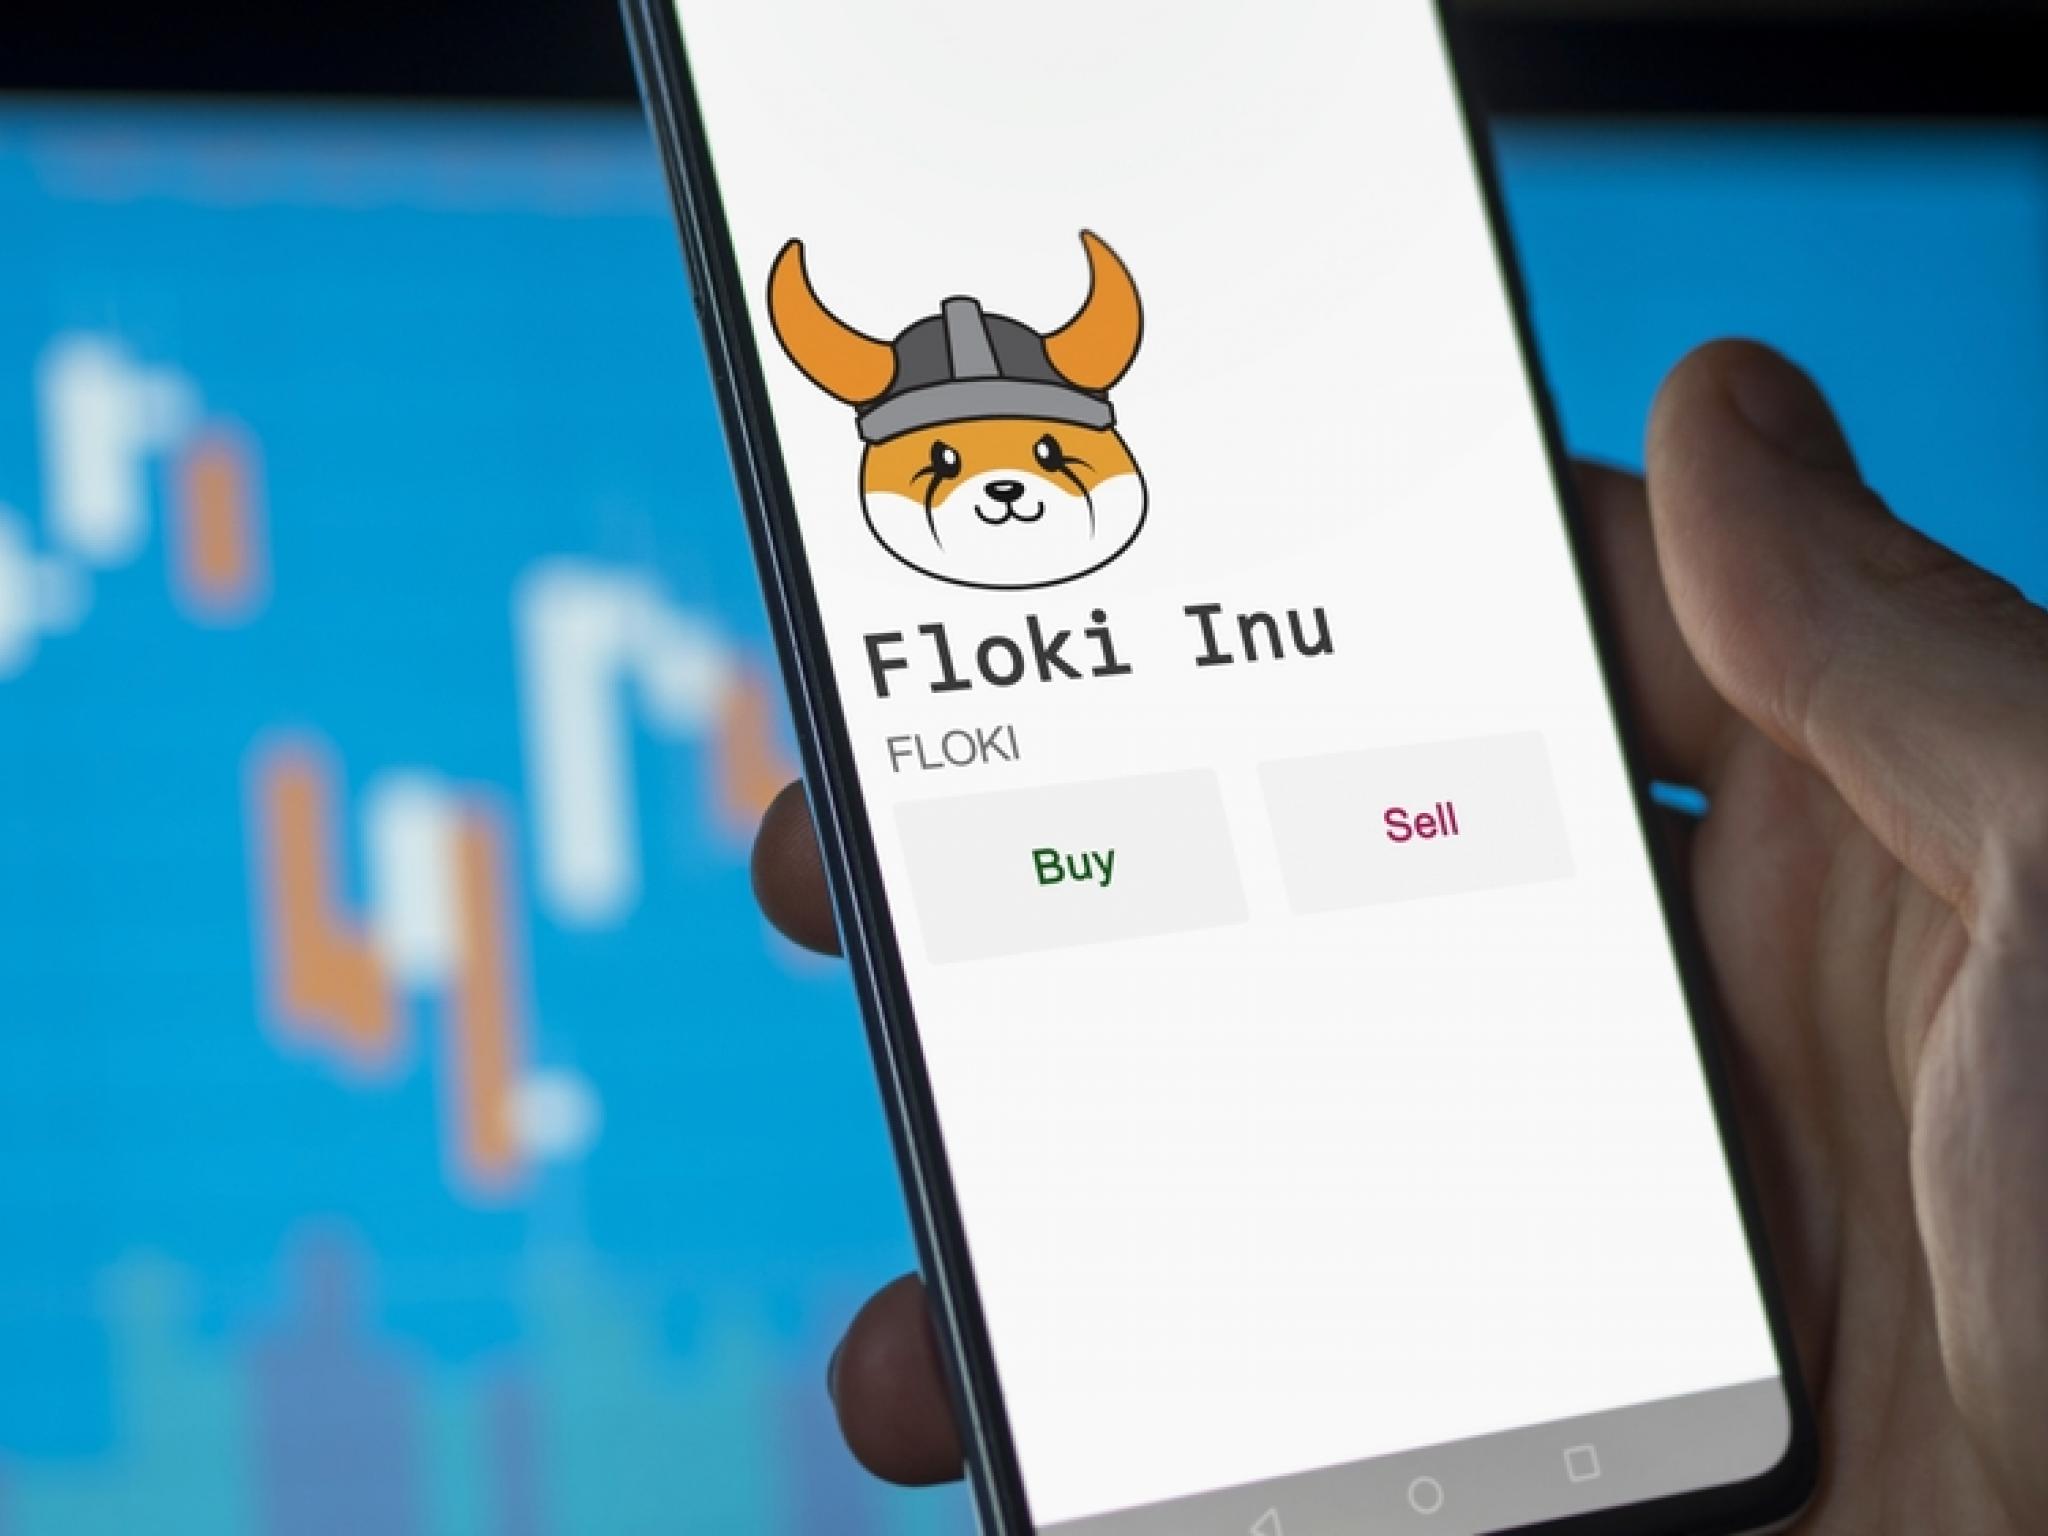  floki-inu-launches-name-service-adding-higher-utility-leaves-dogecoin-shiba-inu-in-dust-with-47-monthly-gains 